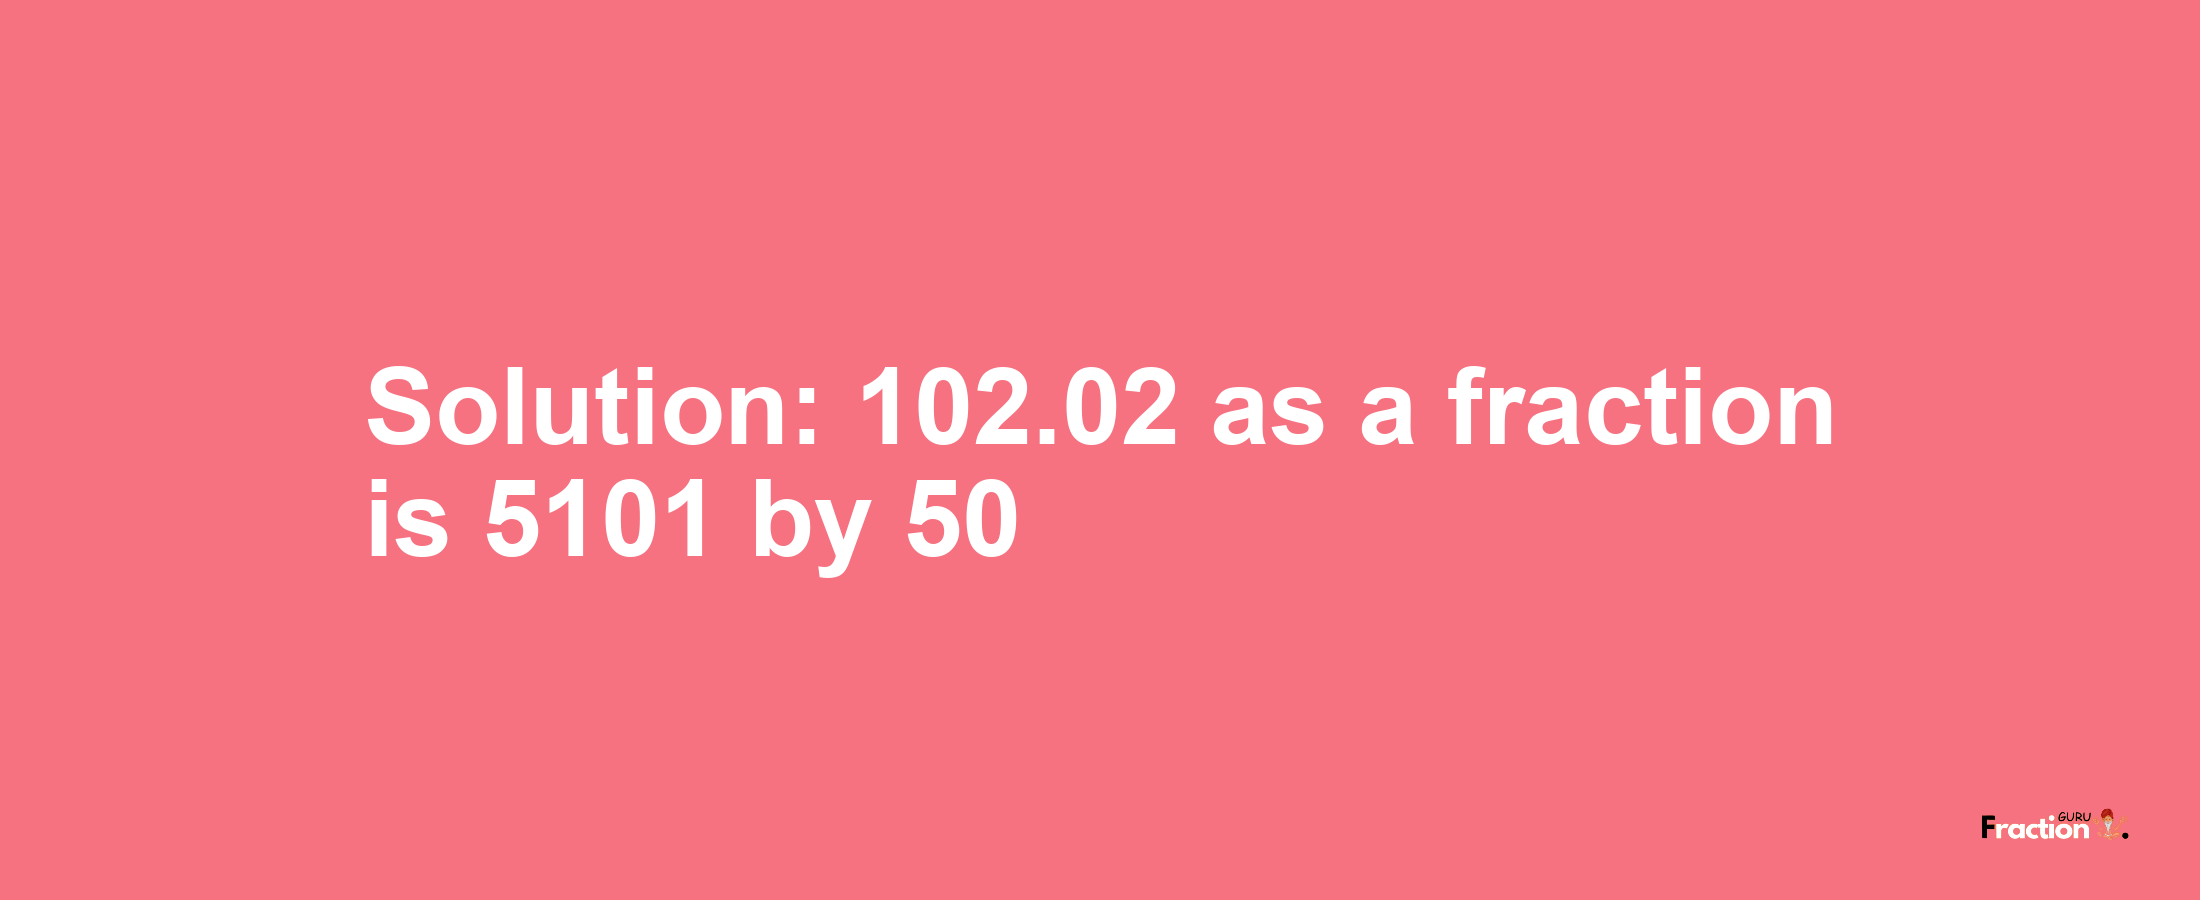 Solution:102.02 as a fraction is 5101/50